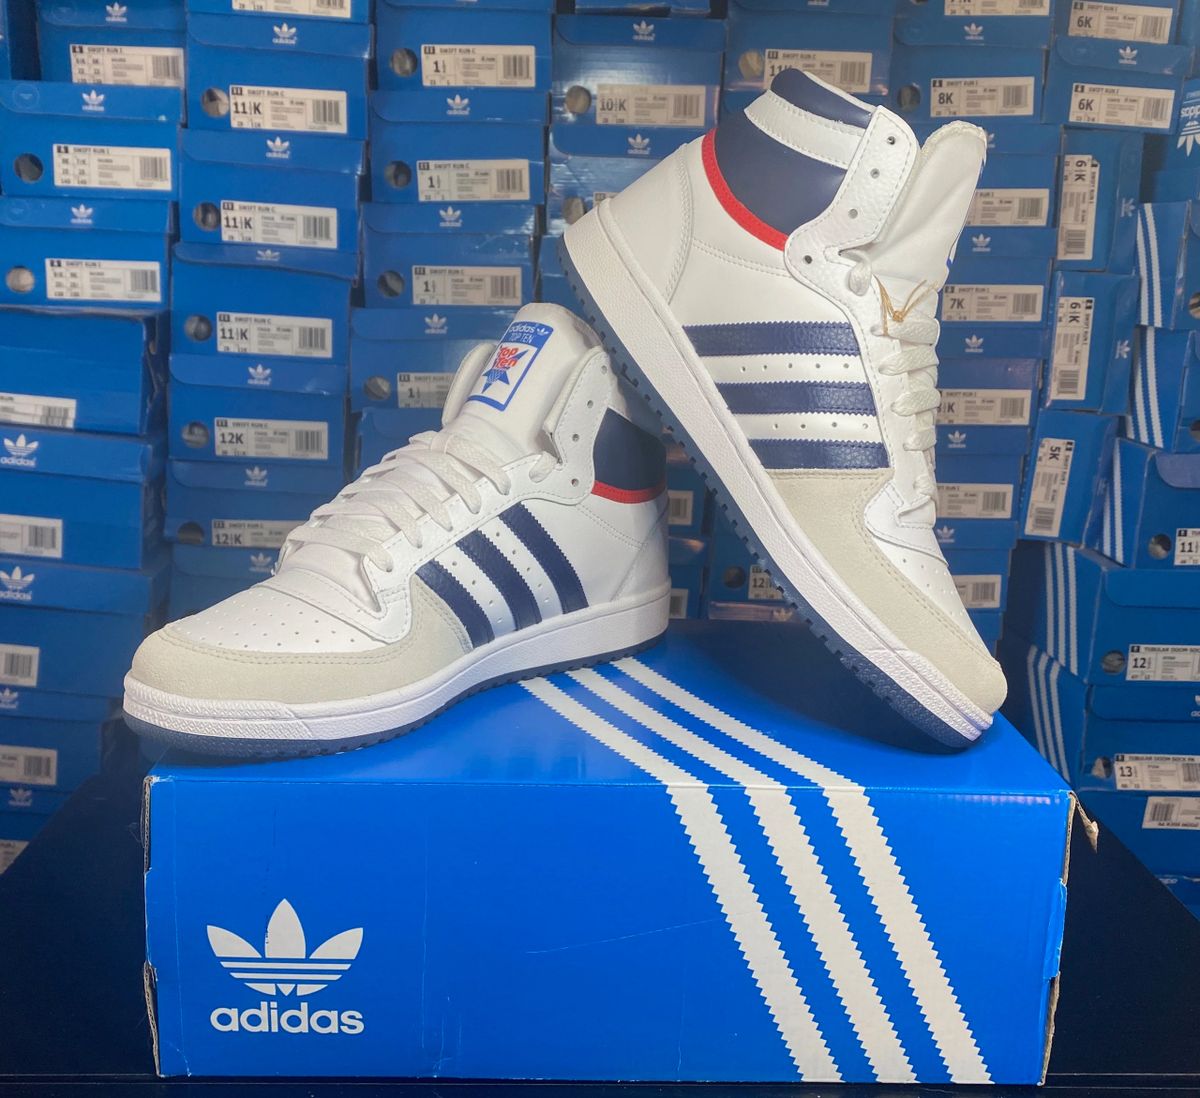 Adidas Top Ten RB, Ftwwht/dkblu/nmarin, Size 8.0 to 14.0